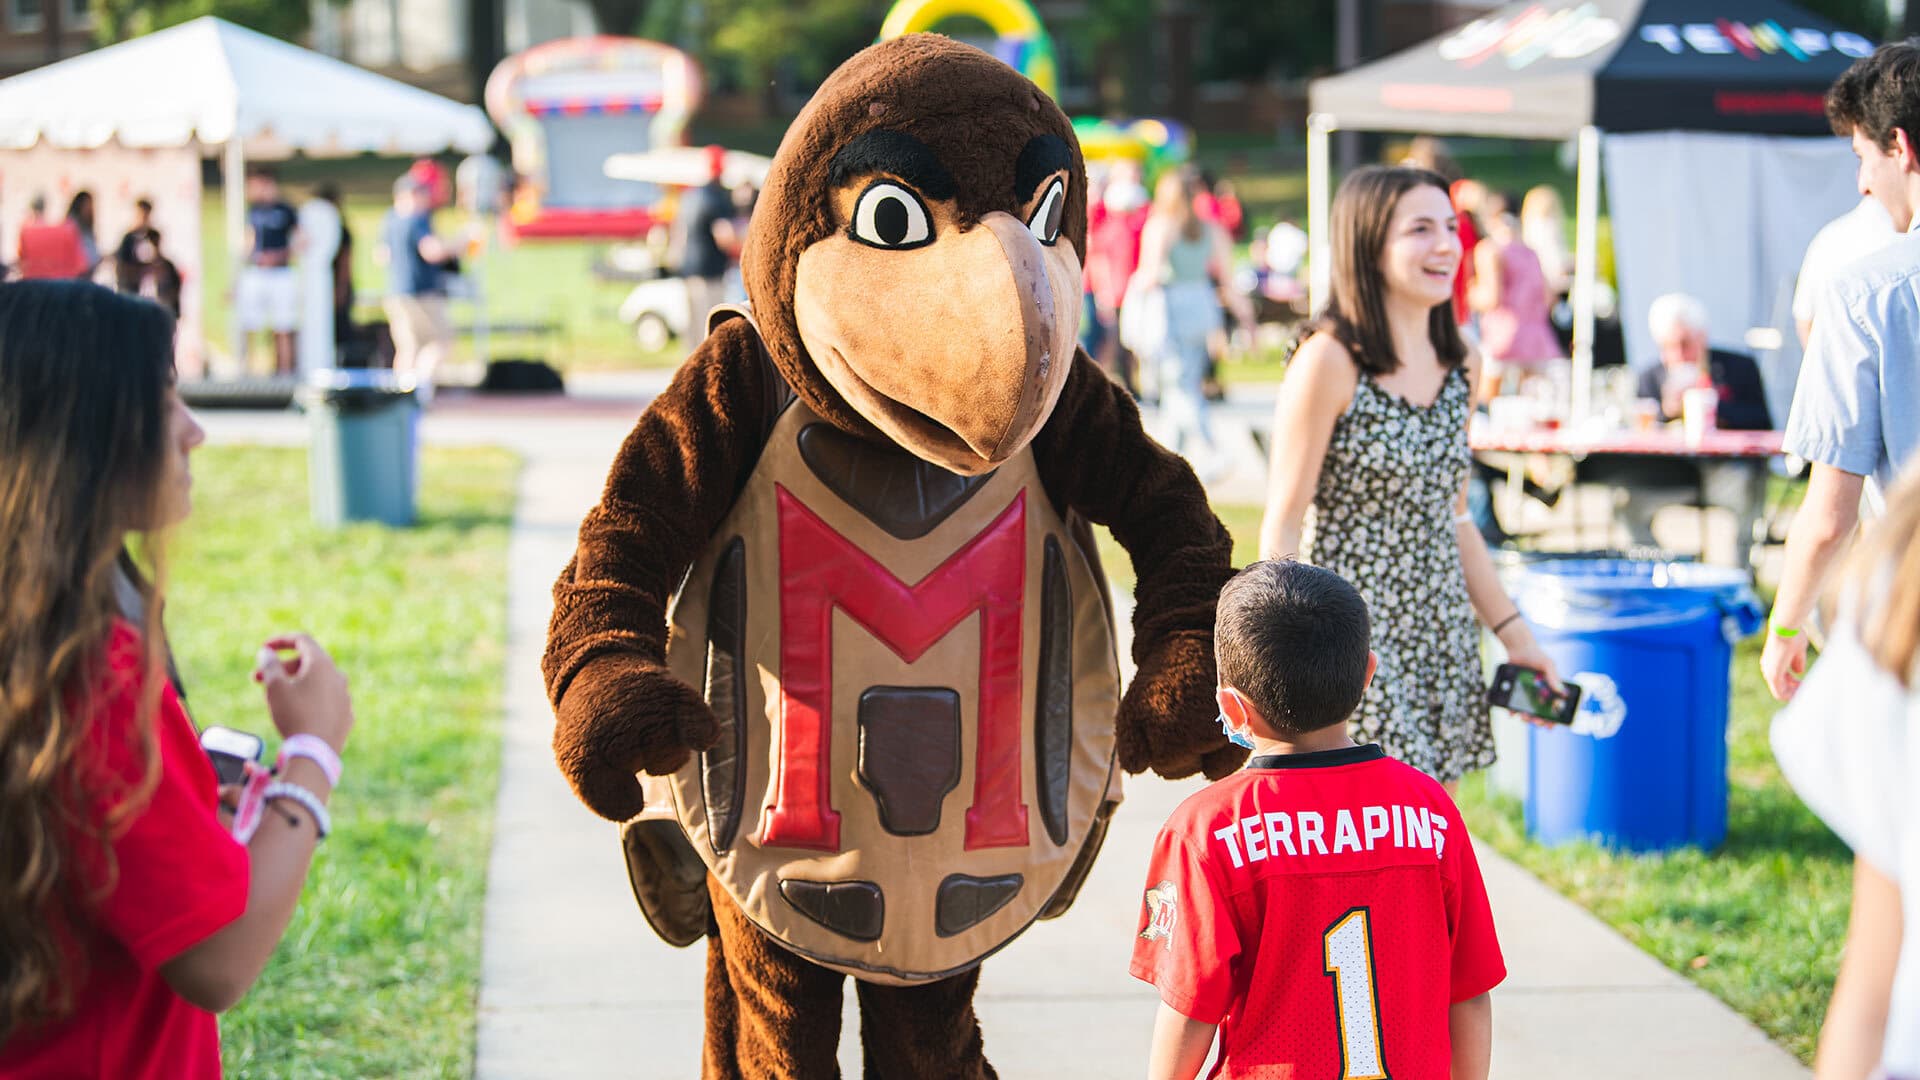 Testudo interacts with small child in UMD football jersey on McKeldin Mall